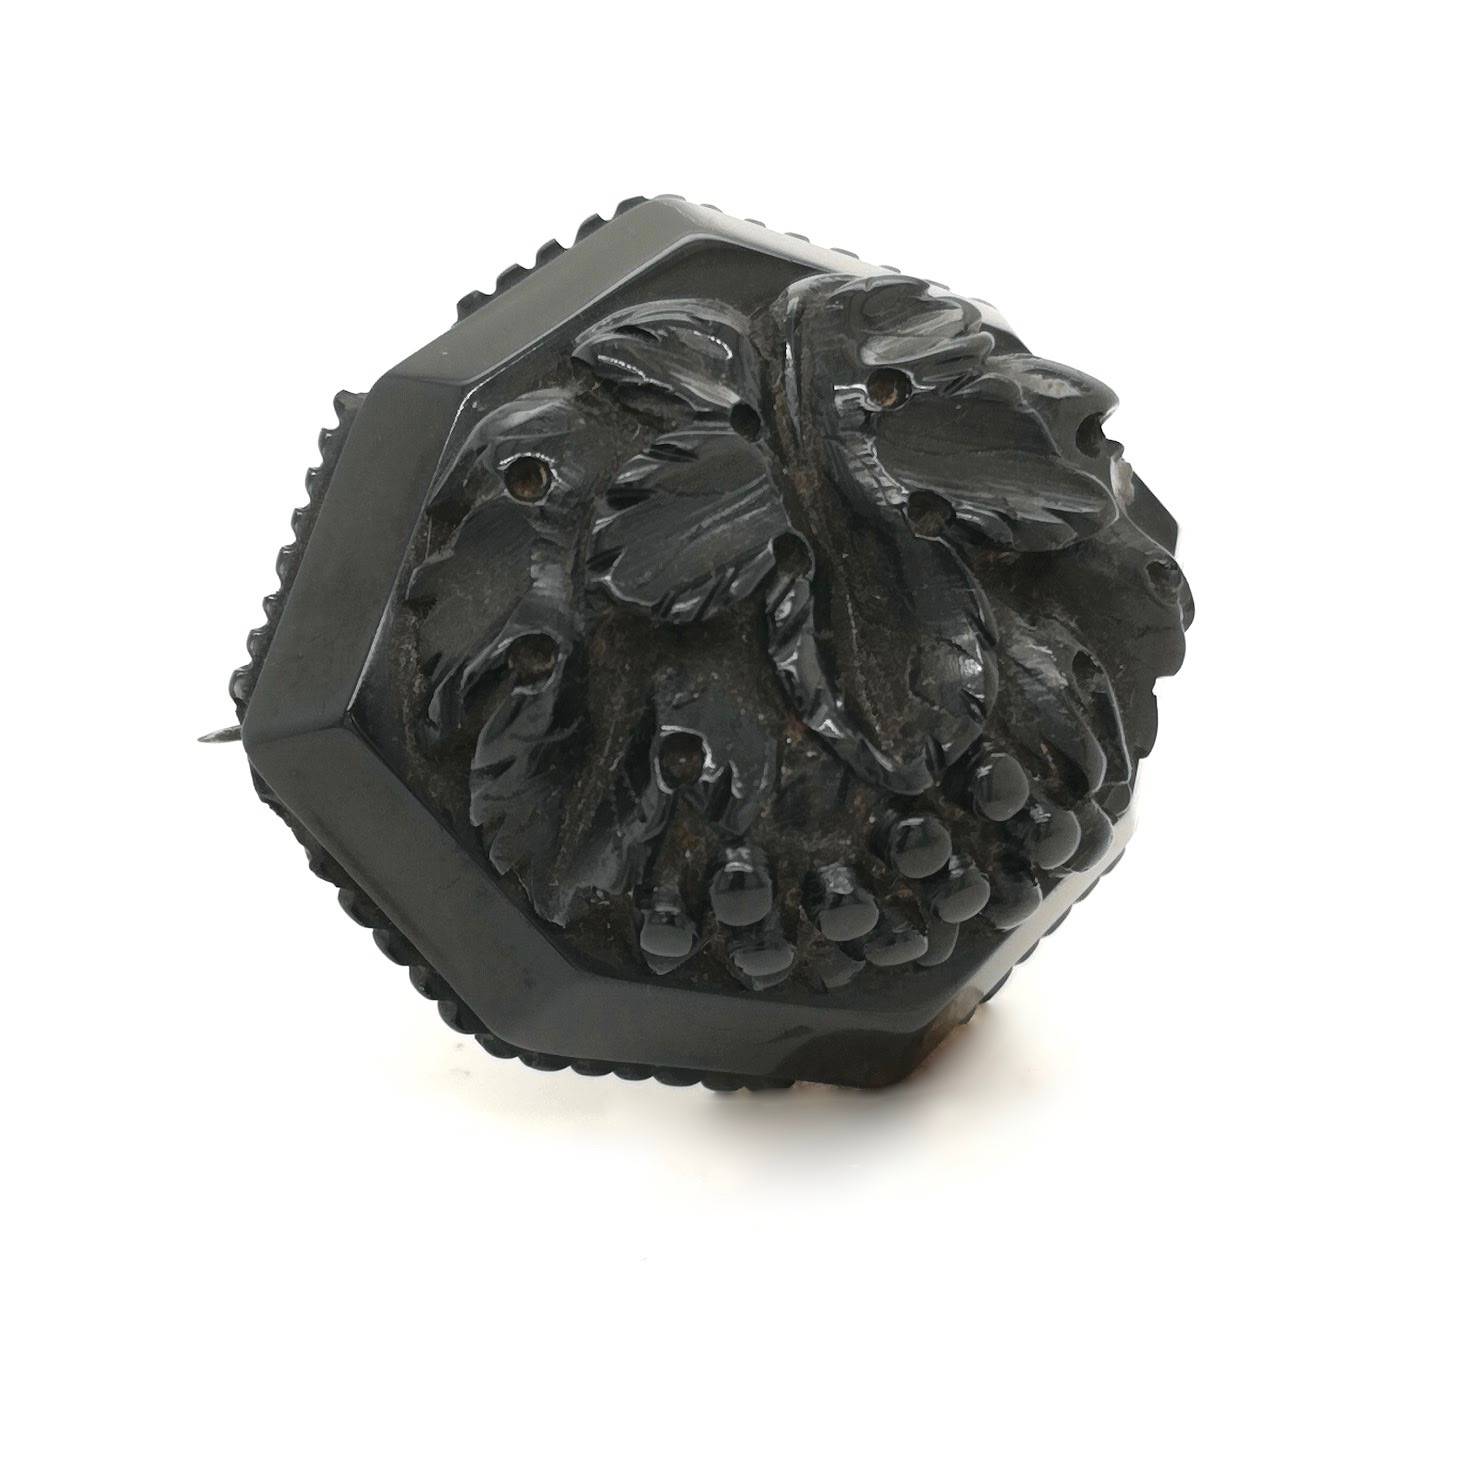 Victorian Whitby Jet Brooch | Antique Whitby Jet | The Ebor Jetworks